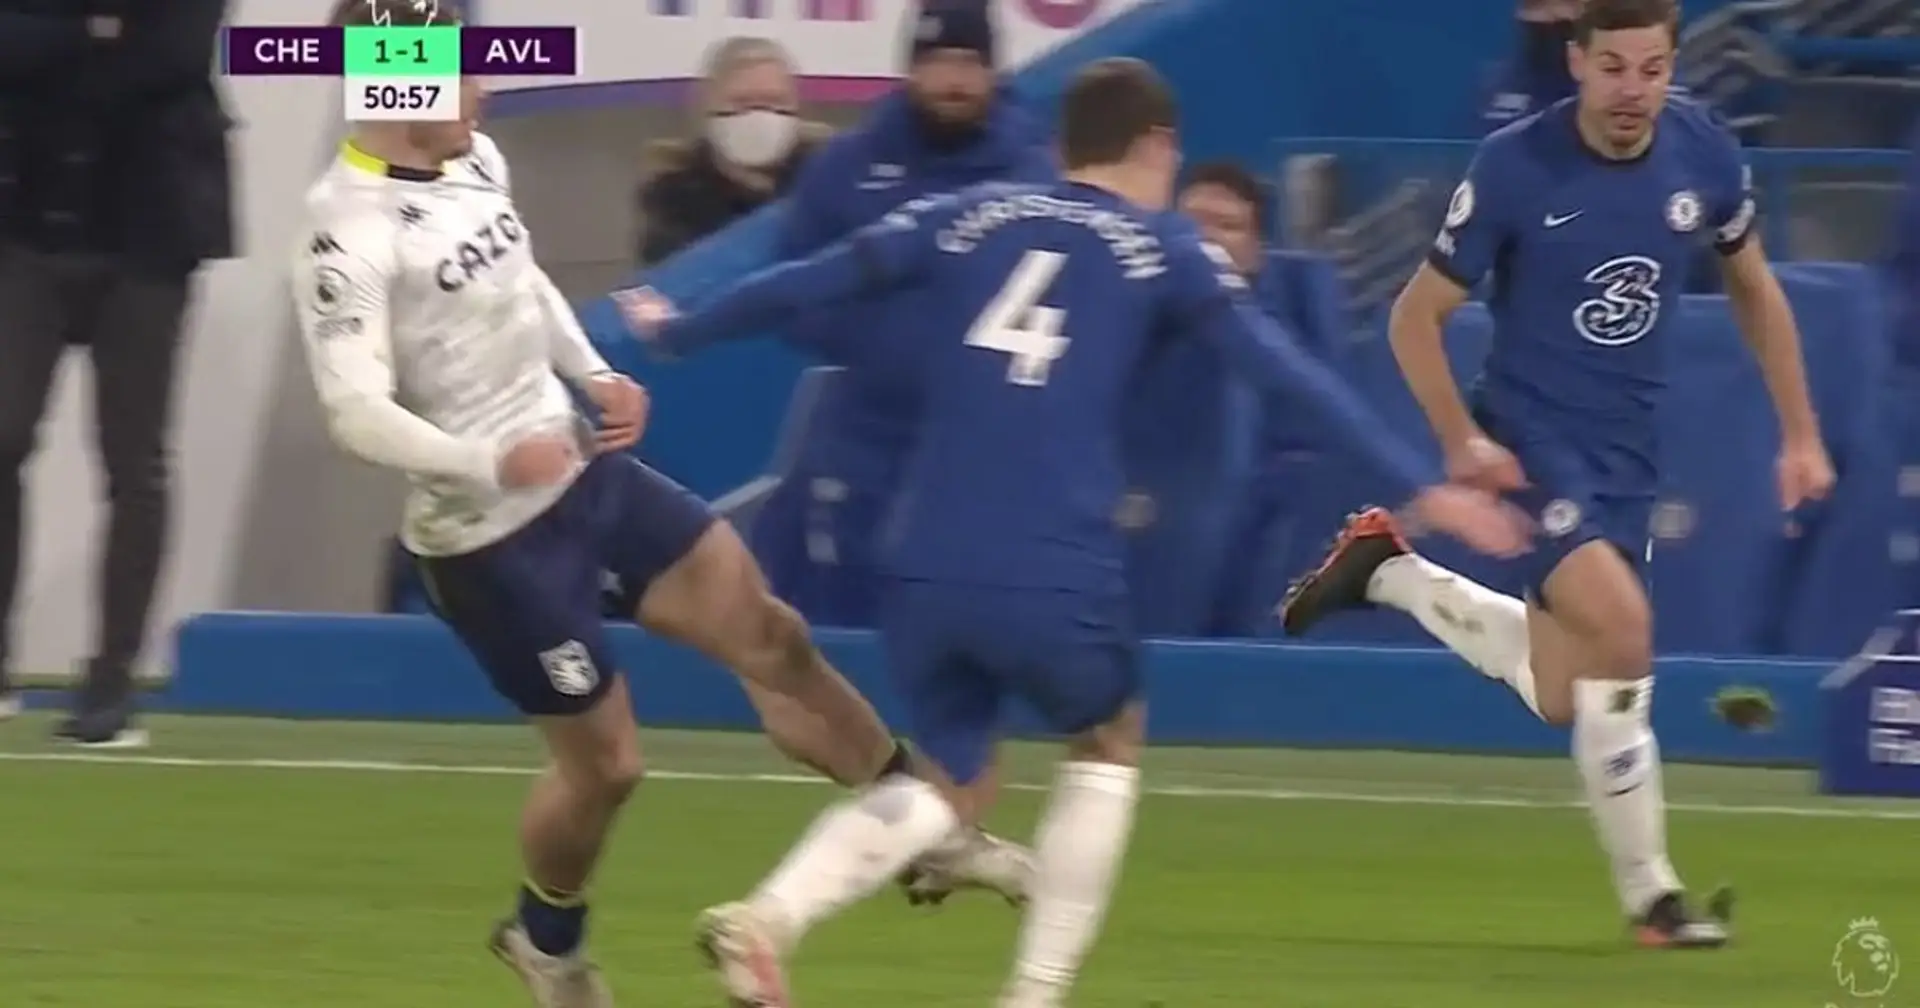 Grealish appears to have fouled on Christensen in build-up to Villa's equaliser - VAR keeps silent